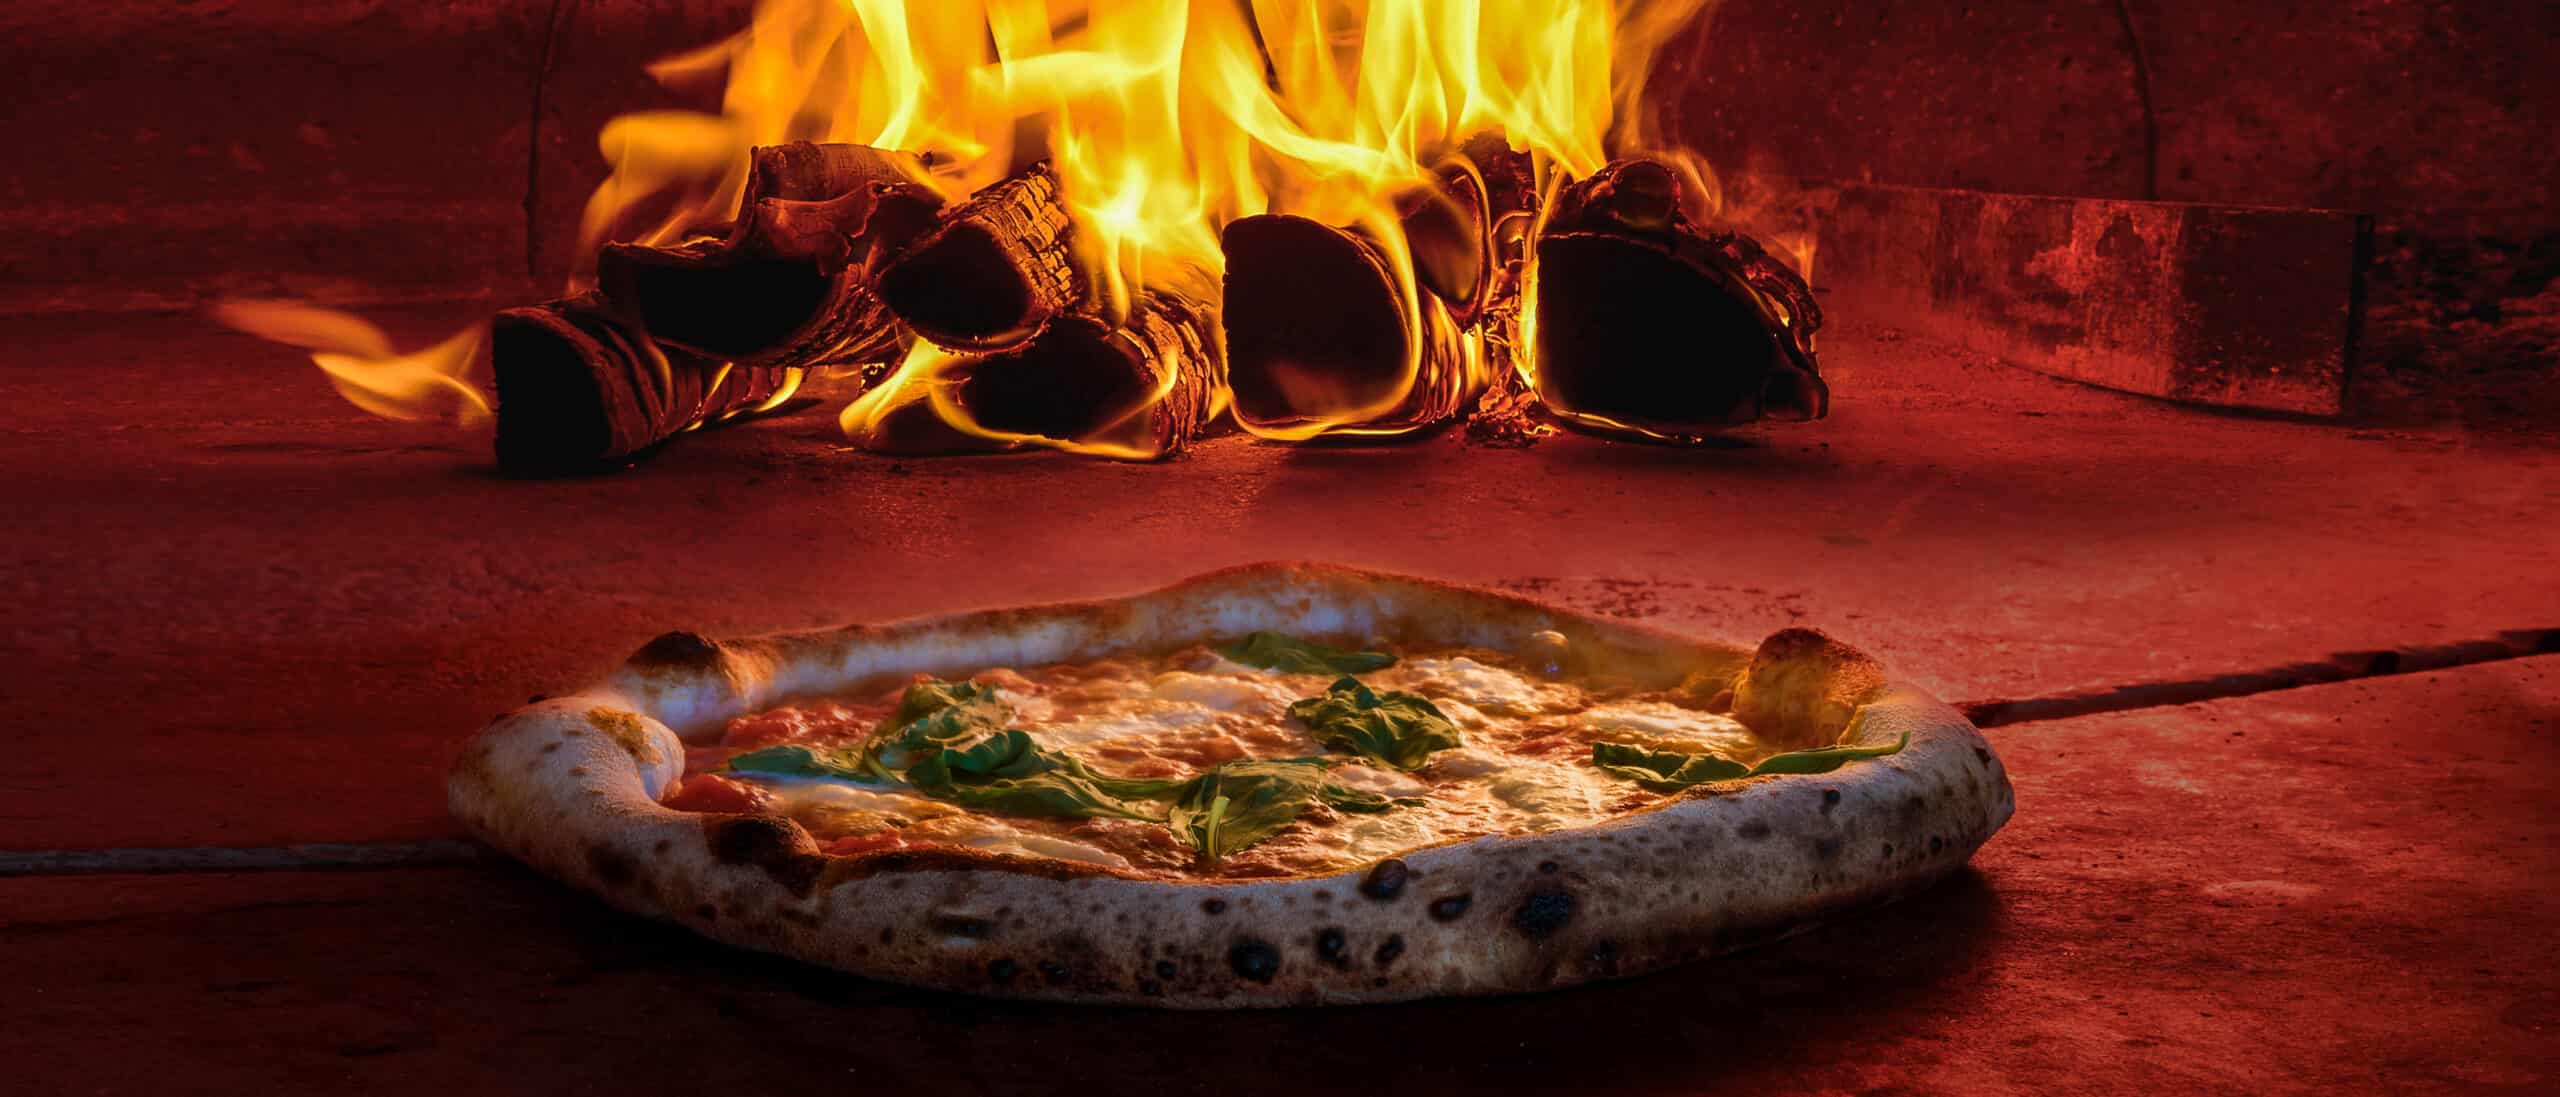 How to make Wood Fired Pizza at home